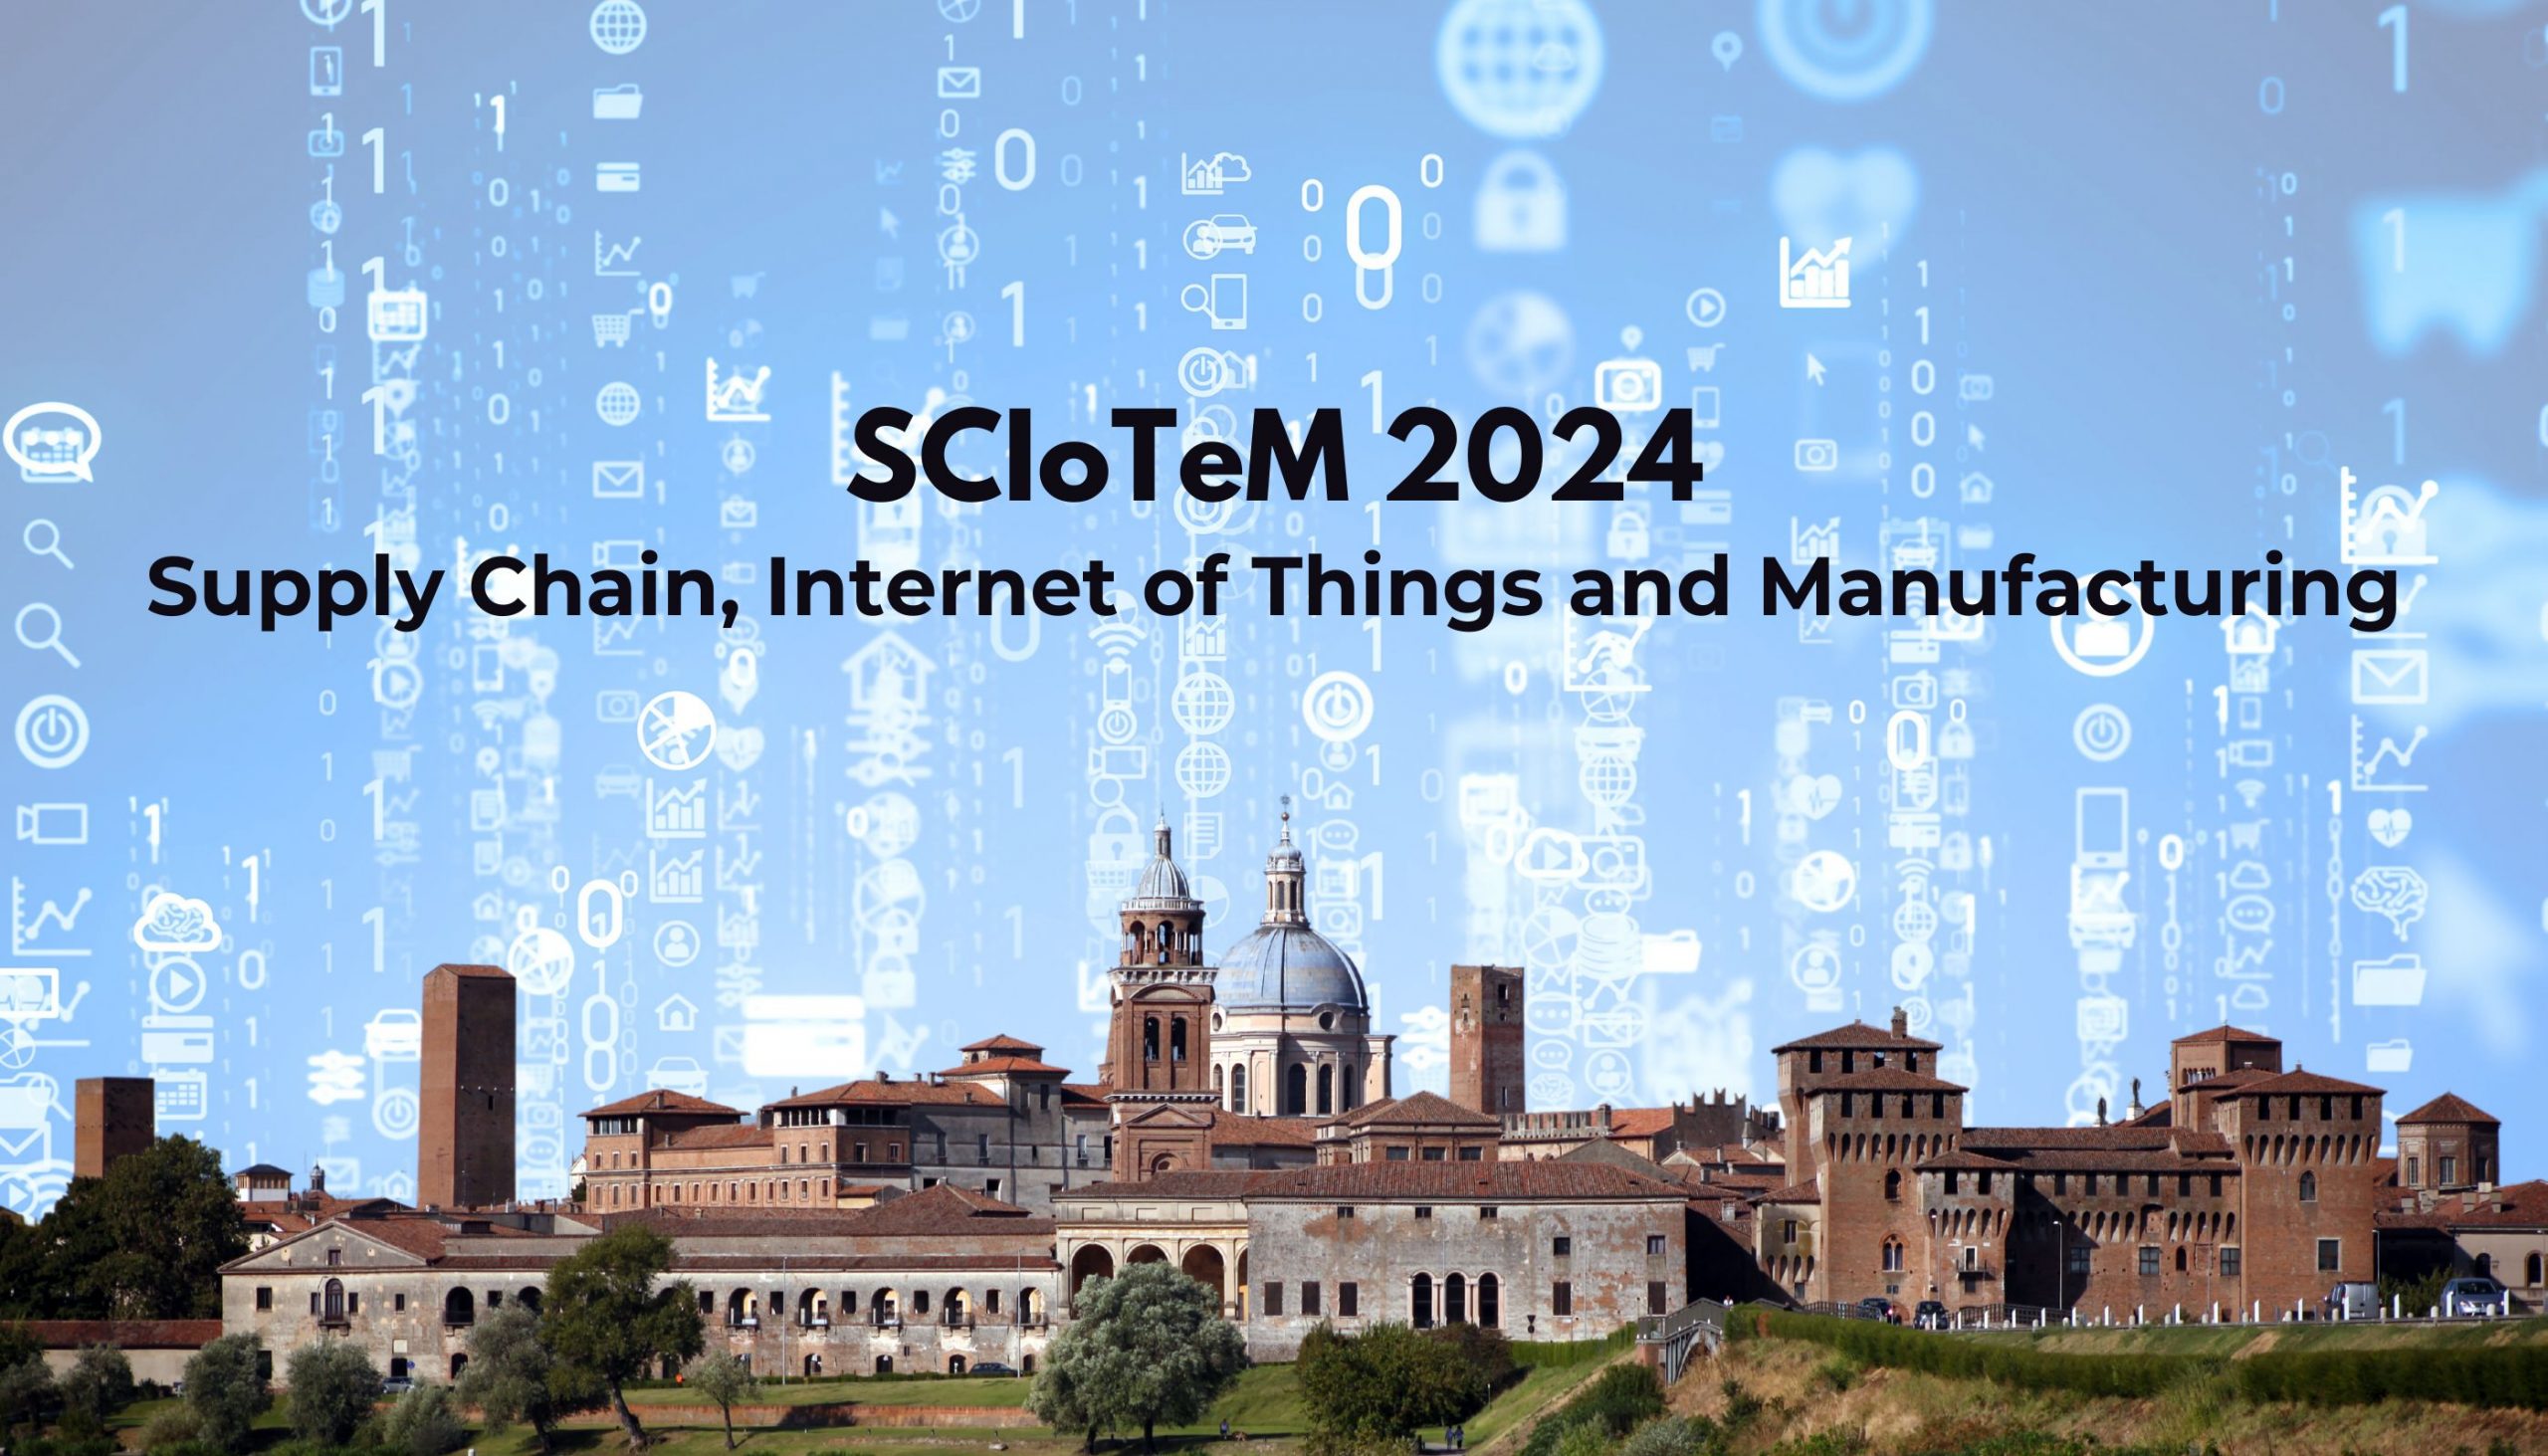 L’Hackathon SCIoTeM 2024 per progettare su Supply Chain, Internet of Things and Manufacturing